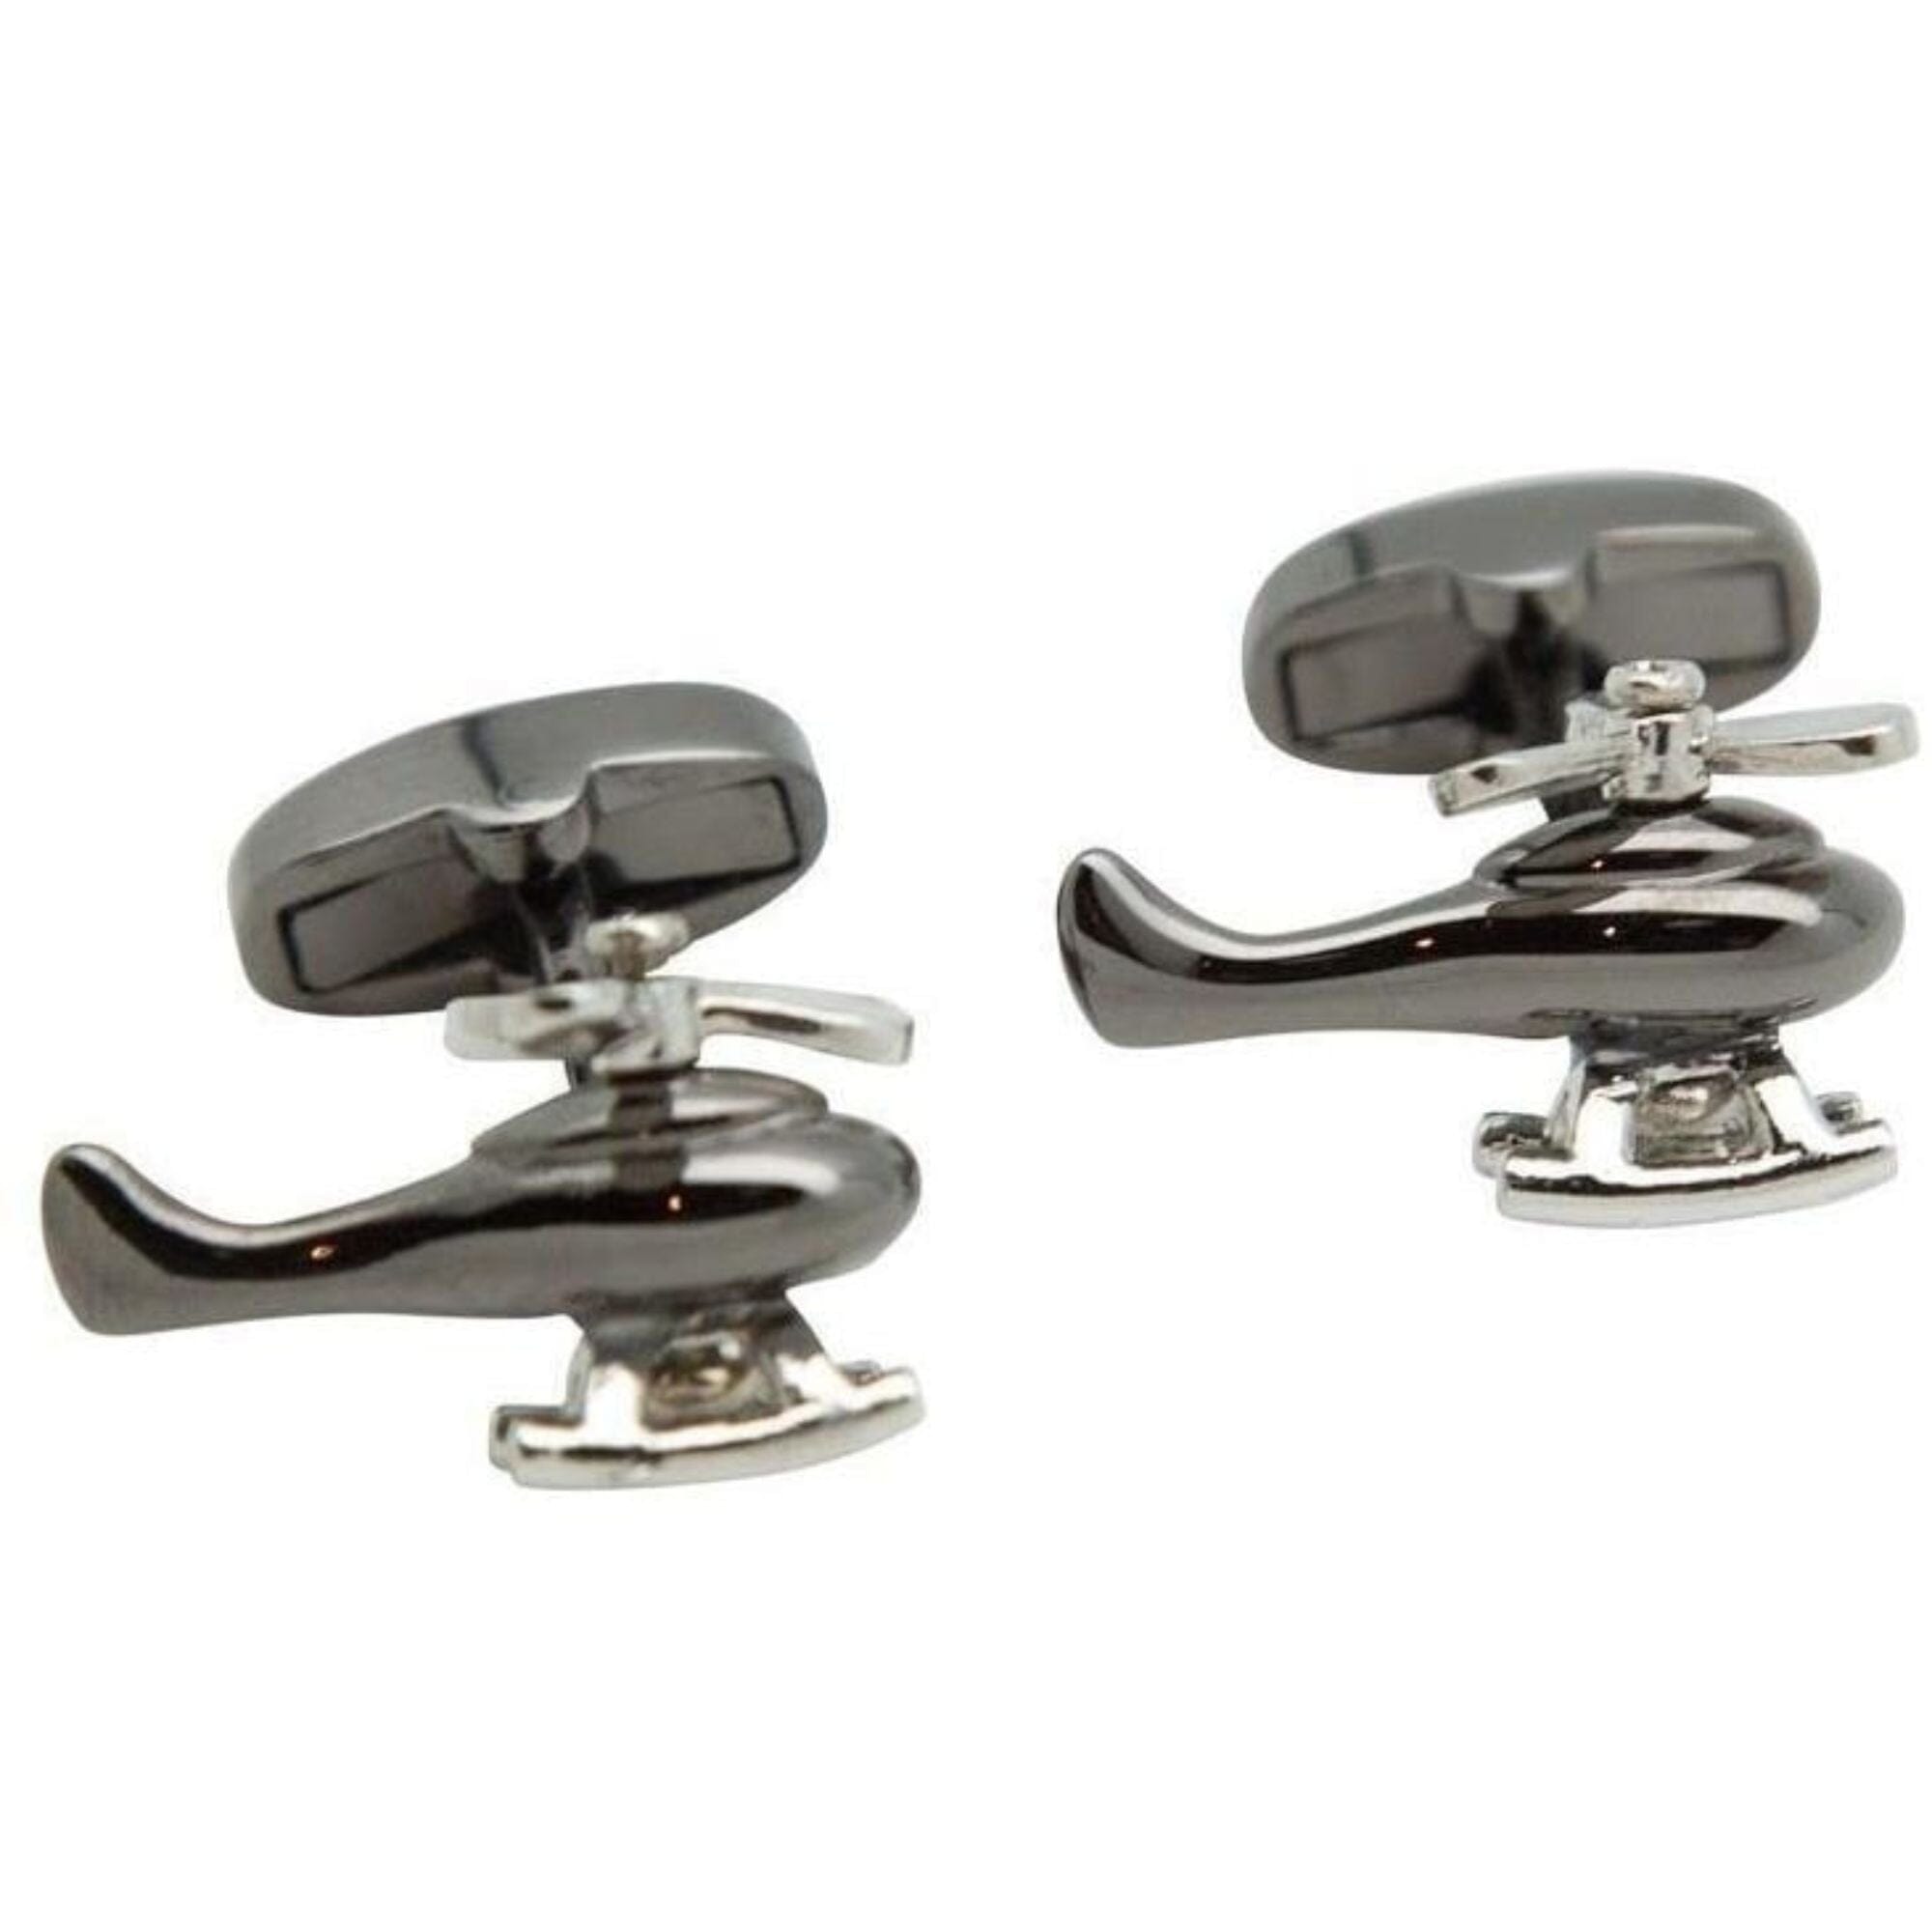 Gunmetal and Silver Helicopter Cufflinks Novelty Cufflinks Clinks Australia Gunmetal and Silver Helicopter Cufflinks 